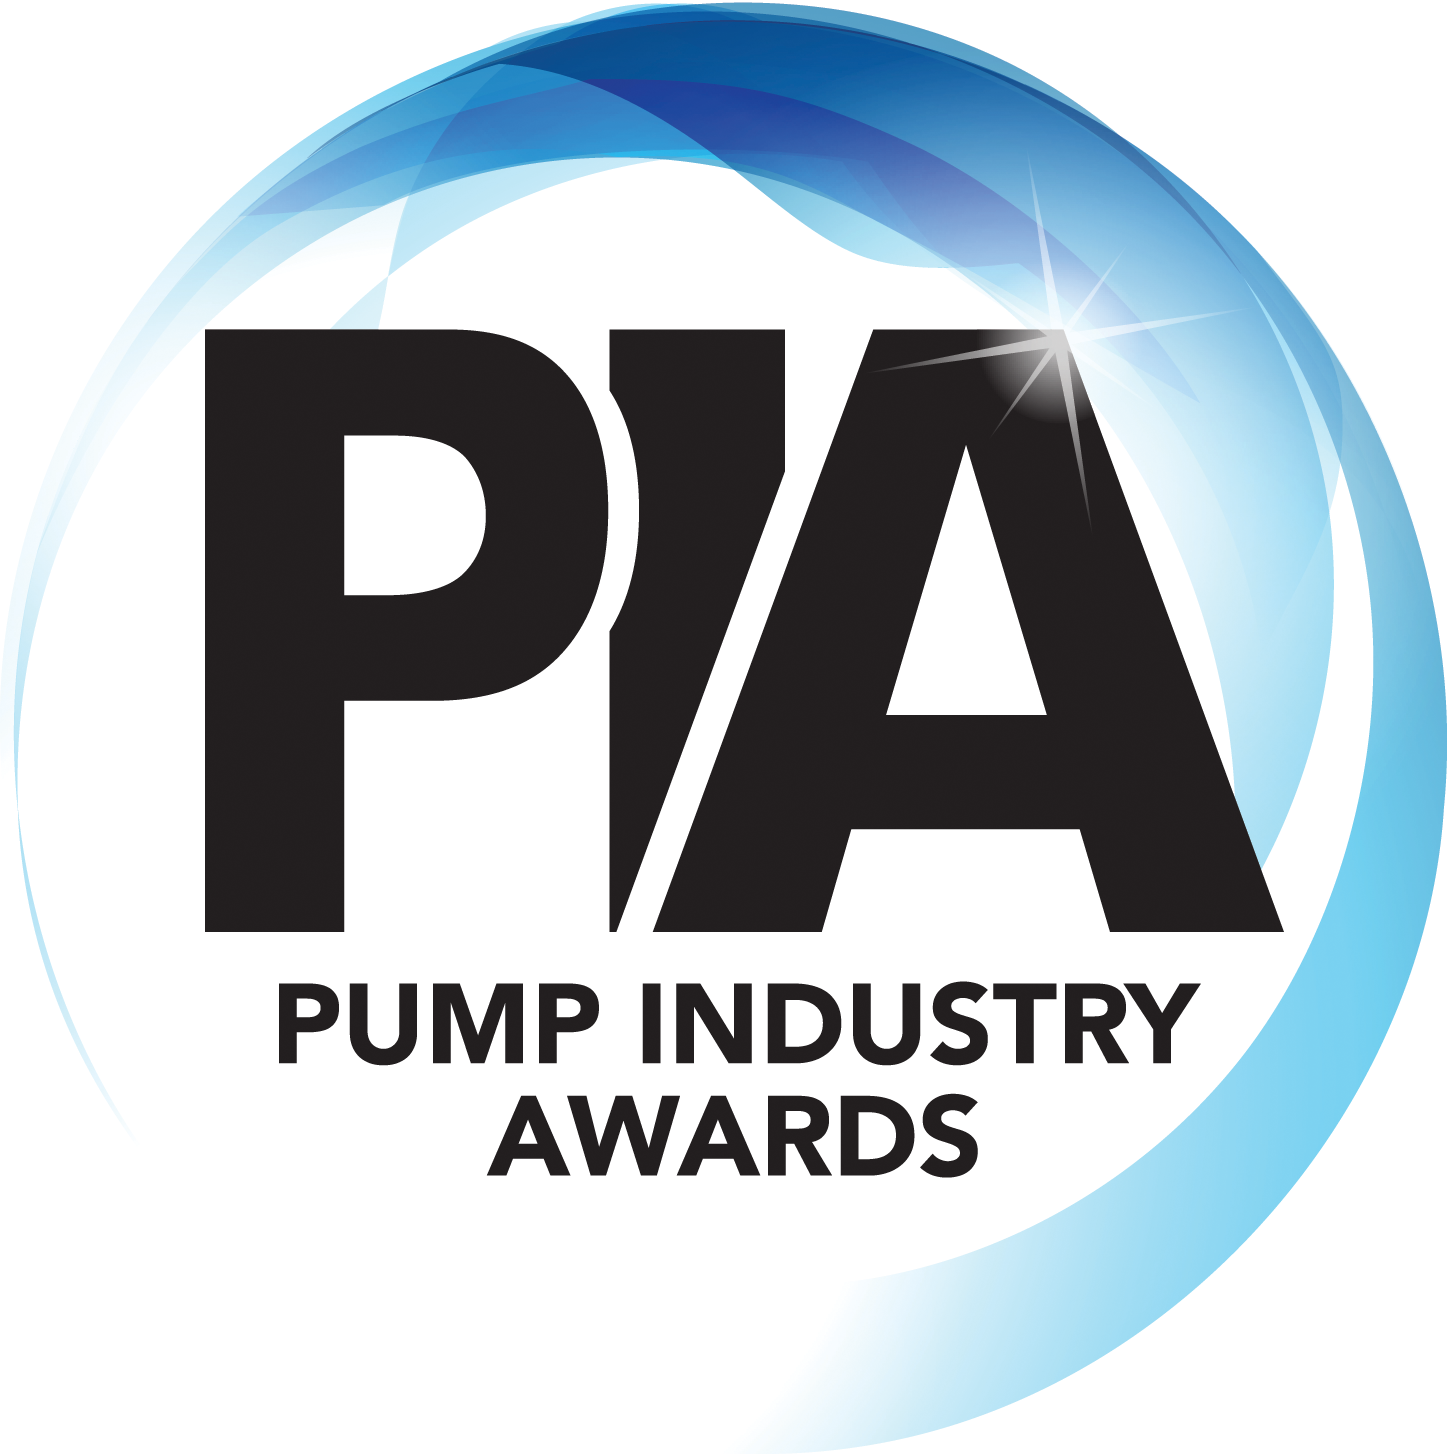 Organisers have agreed to further postpone the 2020/2021 Pump Industry Awards ceremony to 1 July 2021.